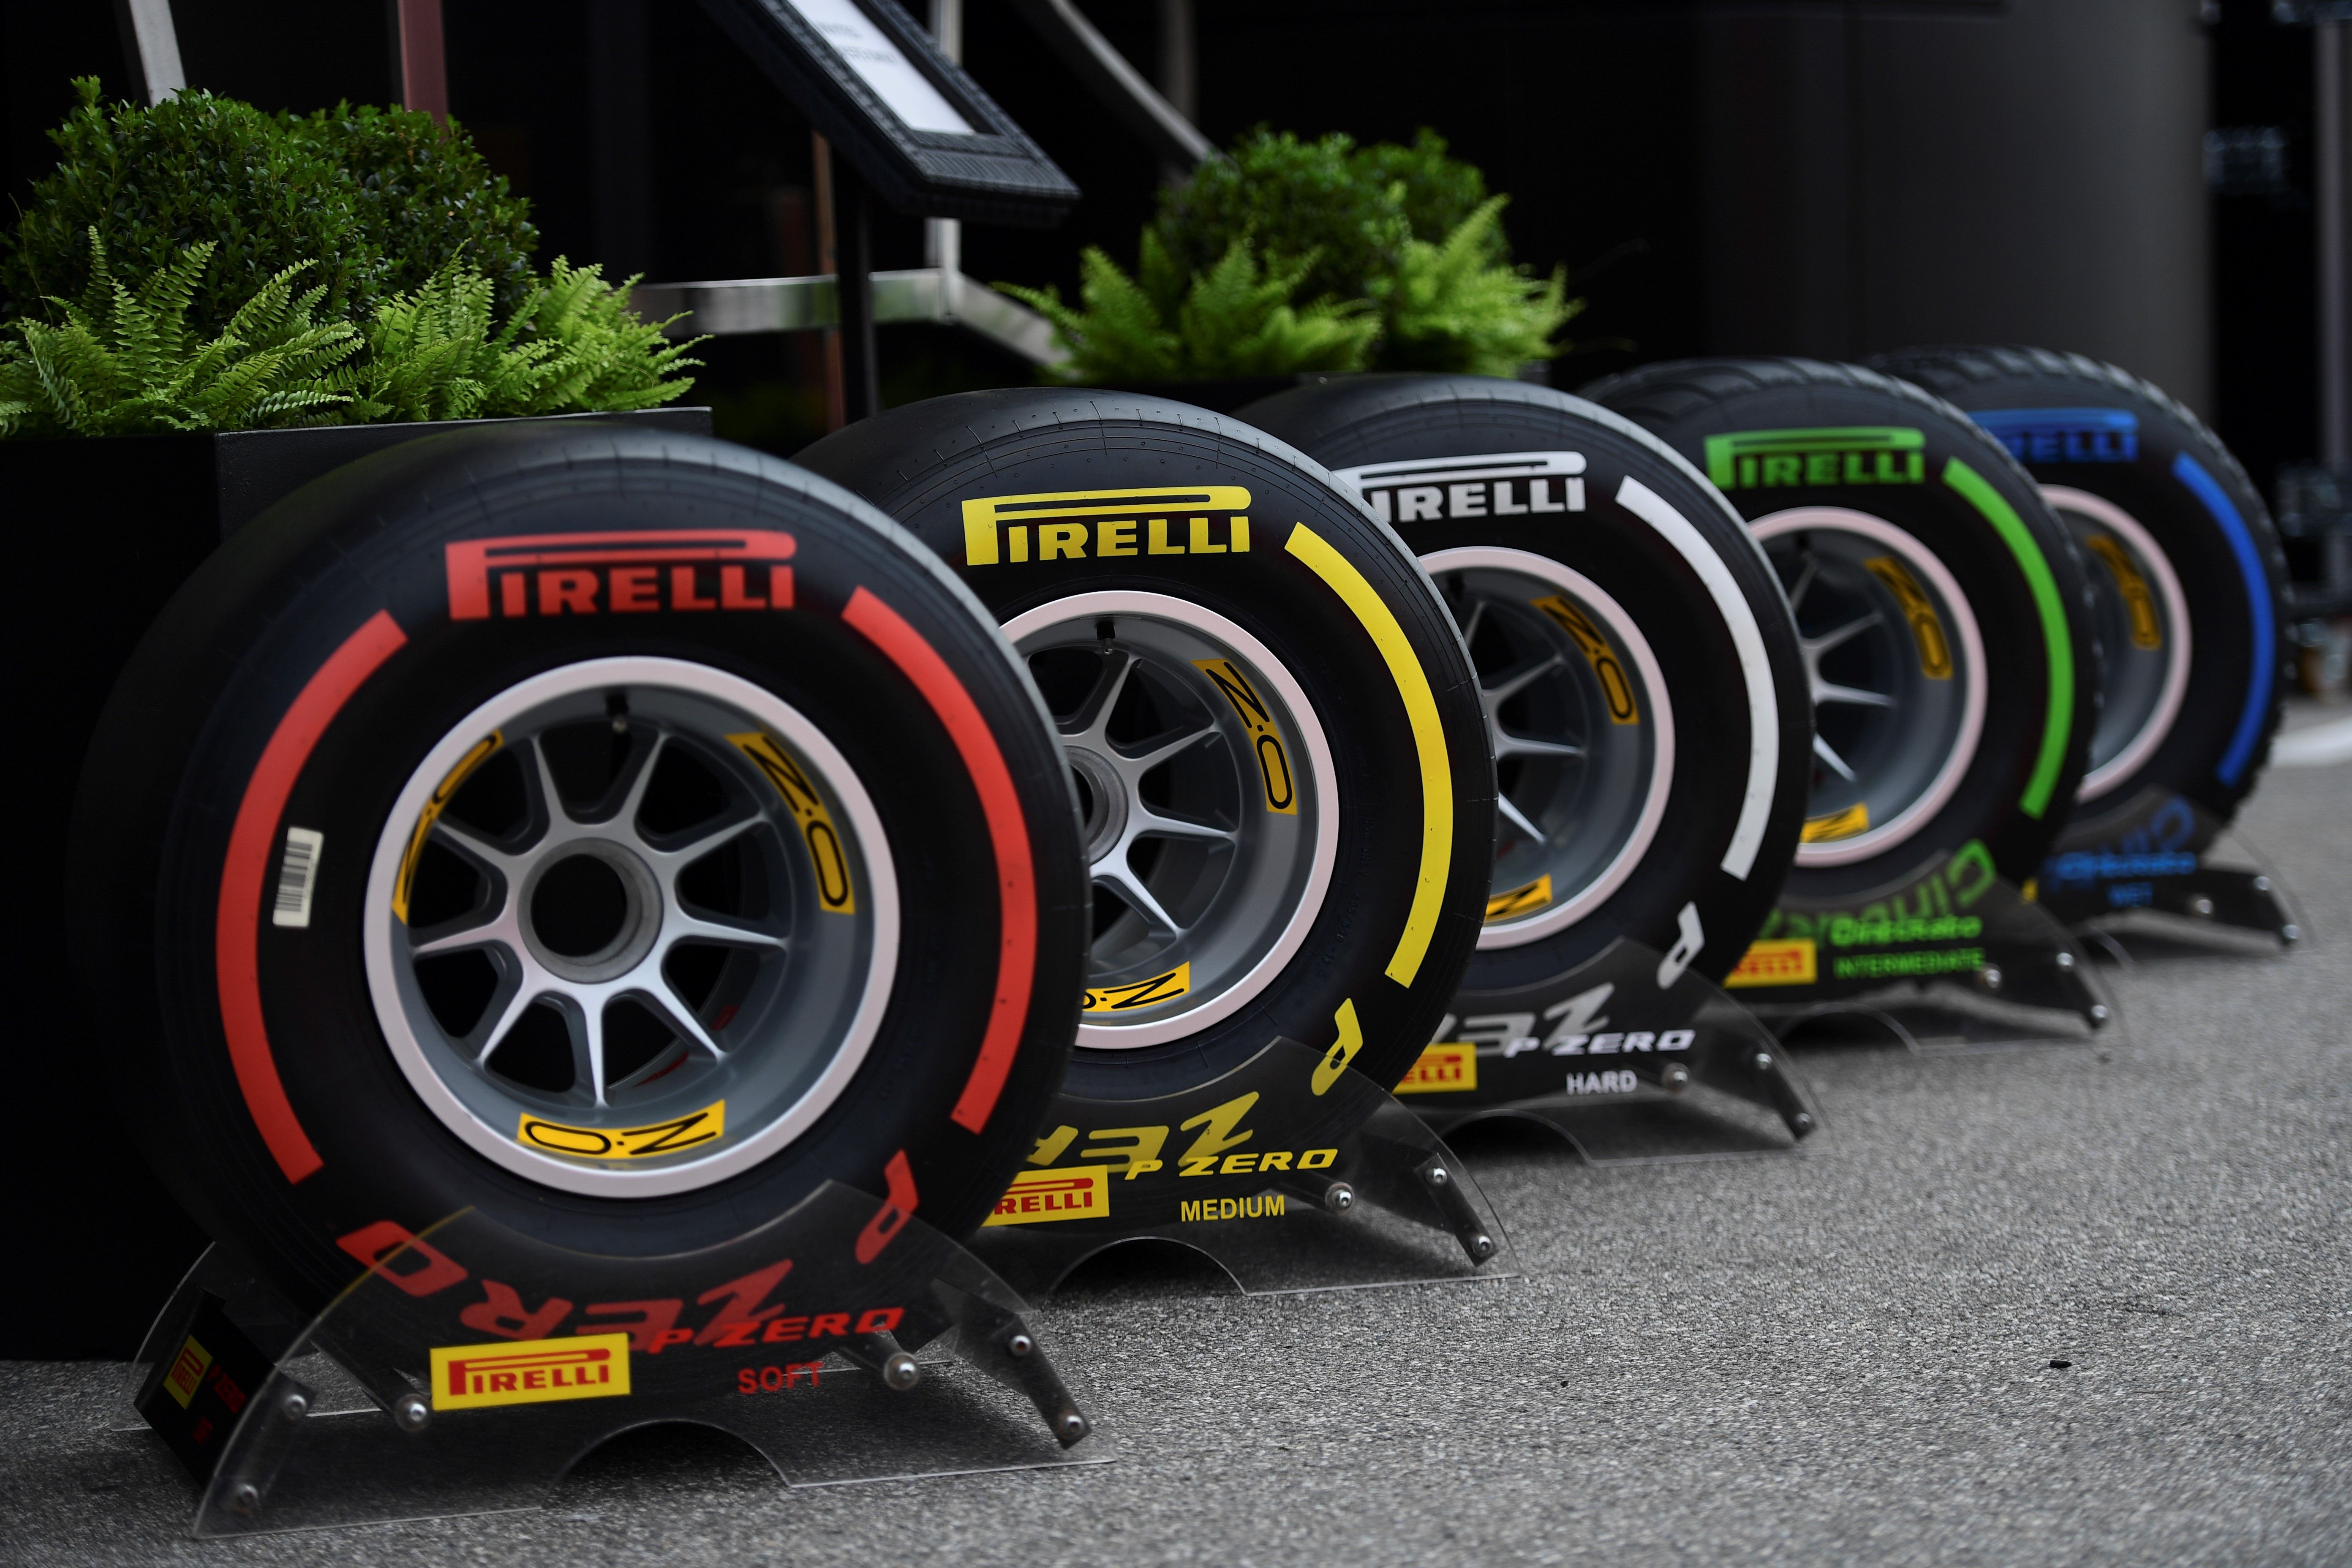 Heres How Many Pirelli Tire Compounds Formula 1 Uses and What the Colors Mean